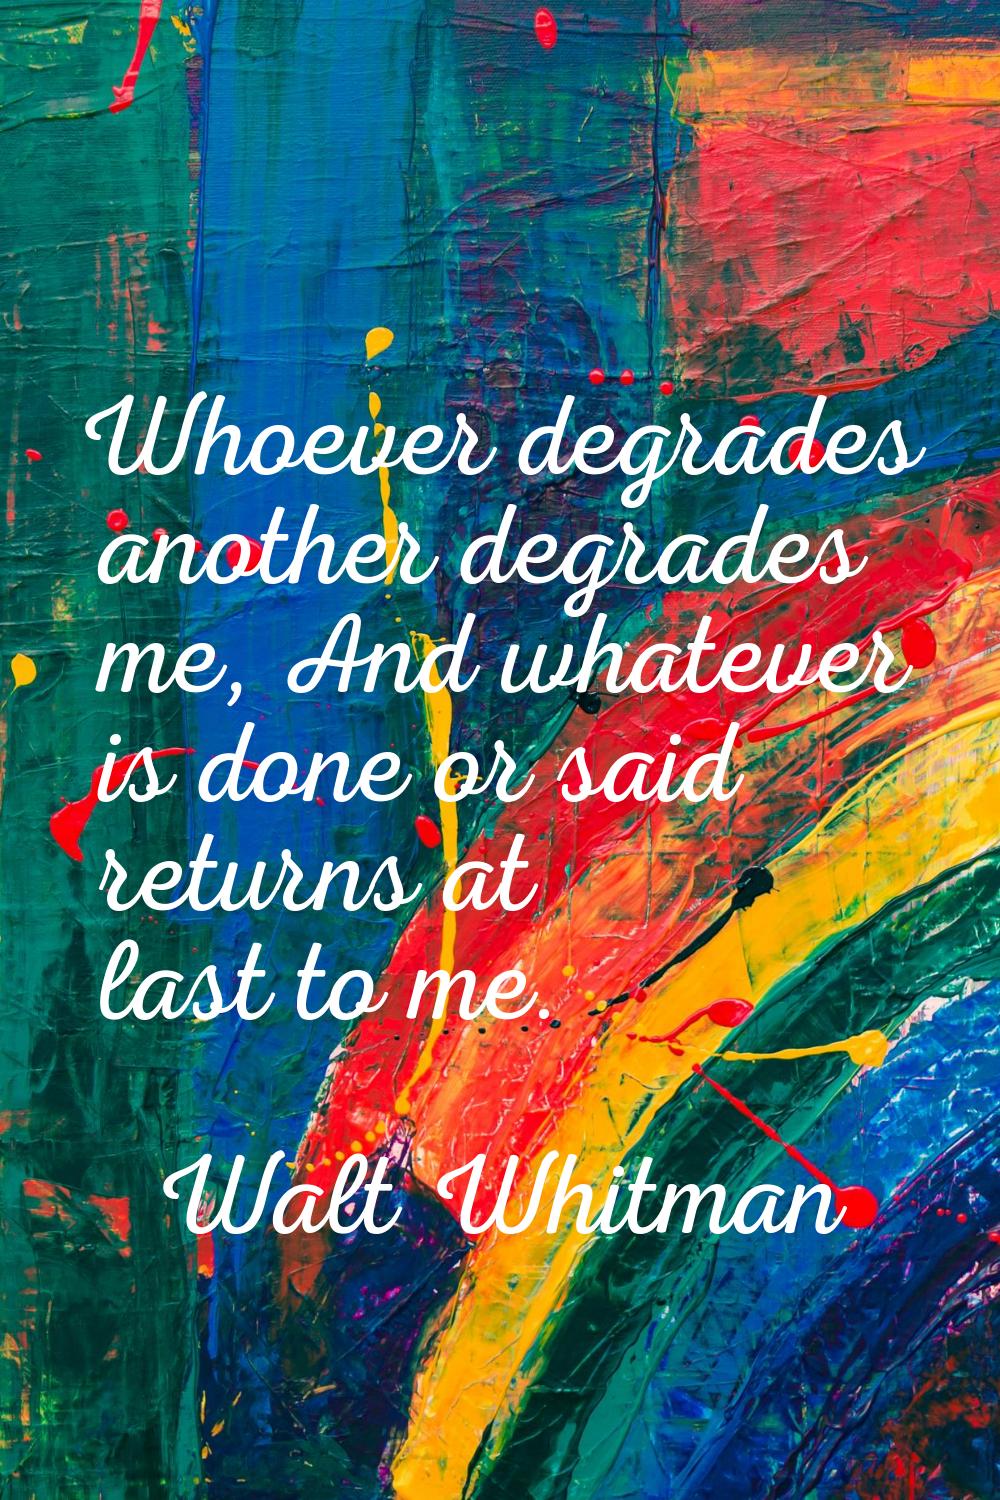 Whoever degrades another degrades me, And whatever is done or said returns at last to me.